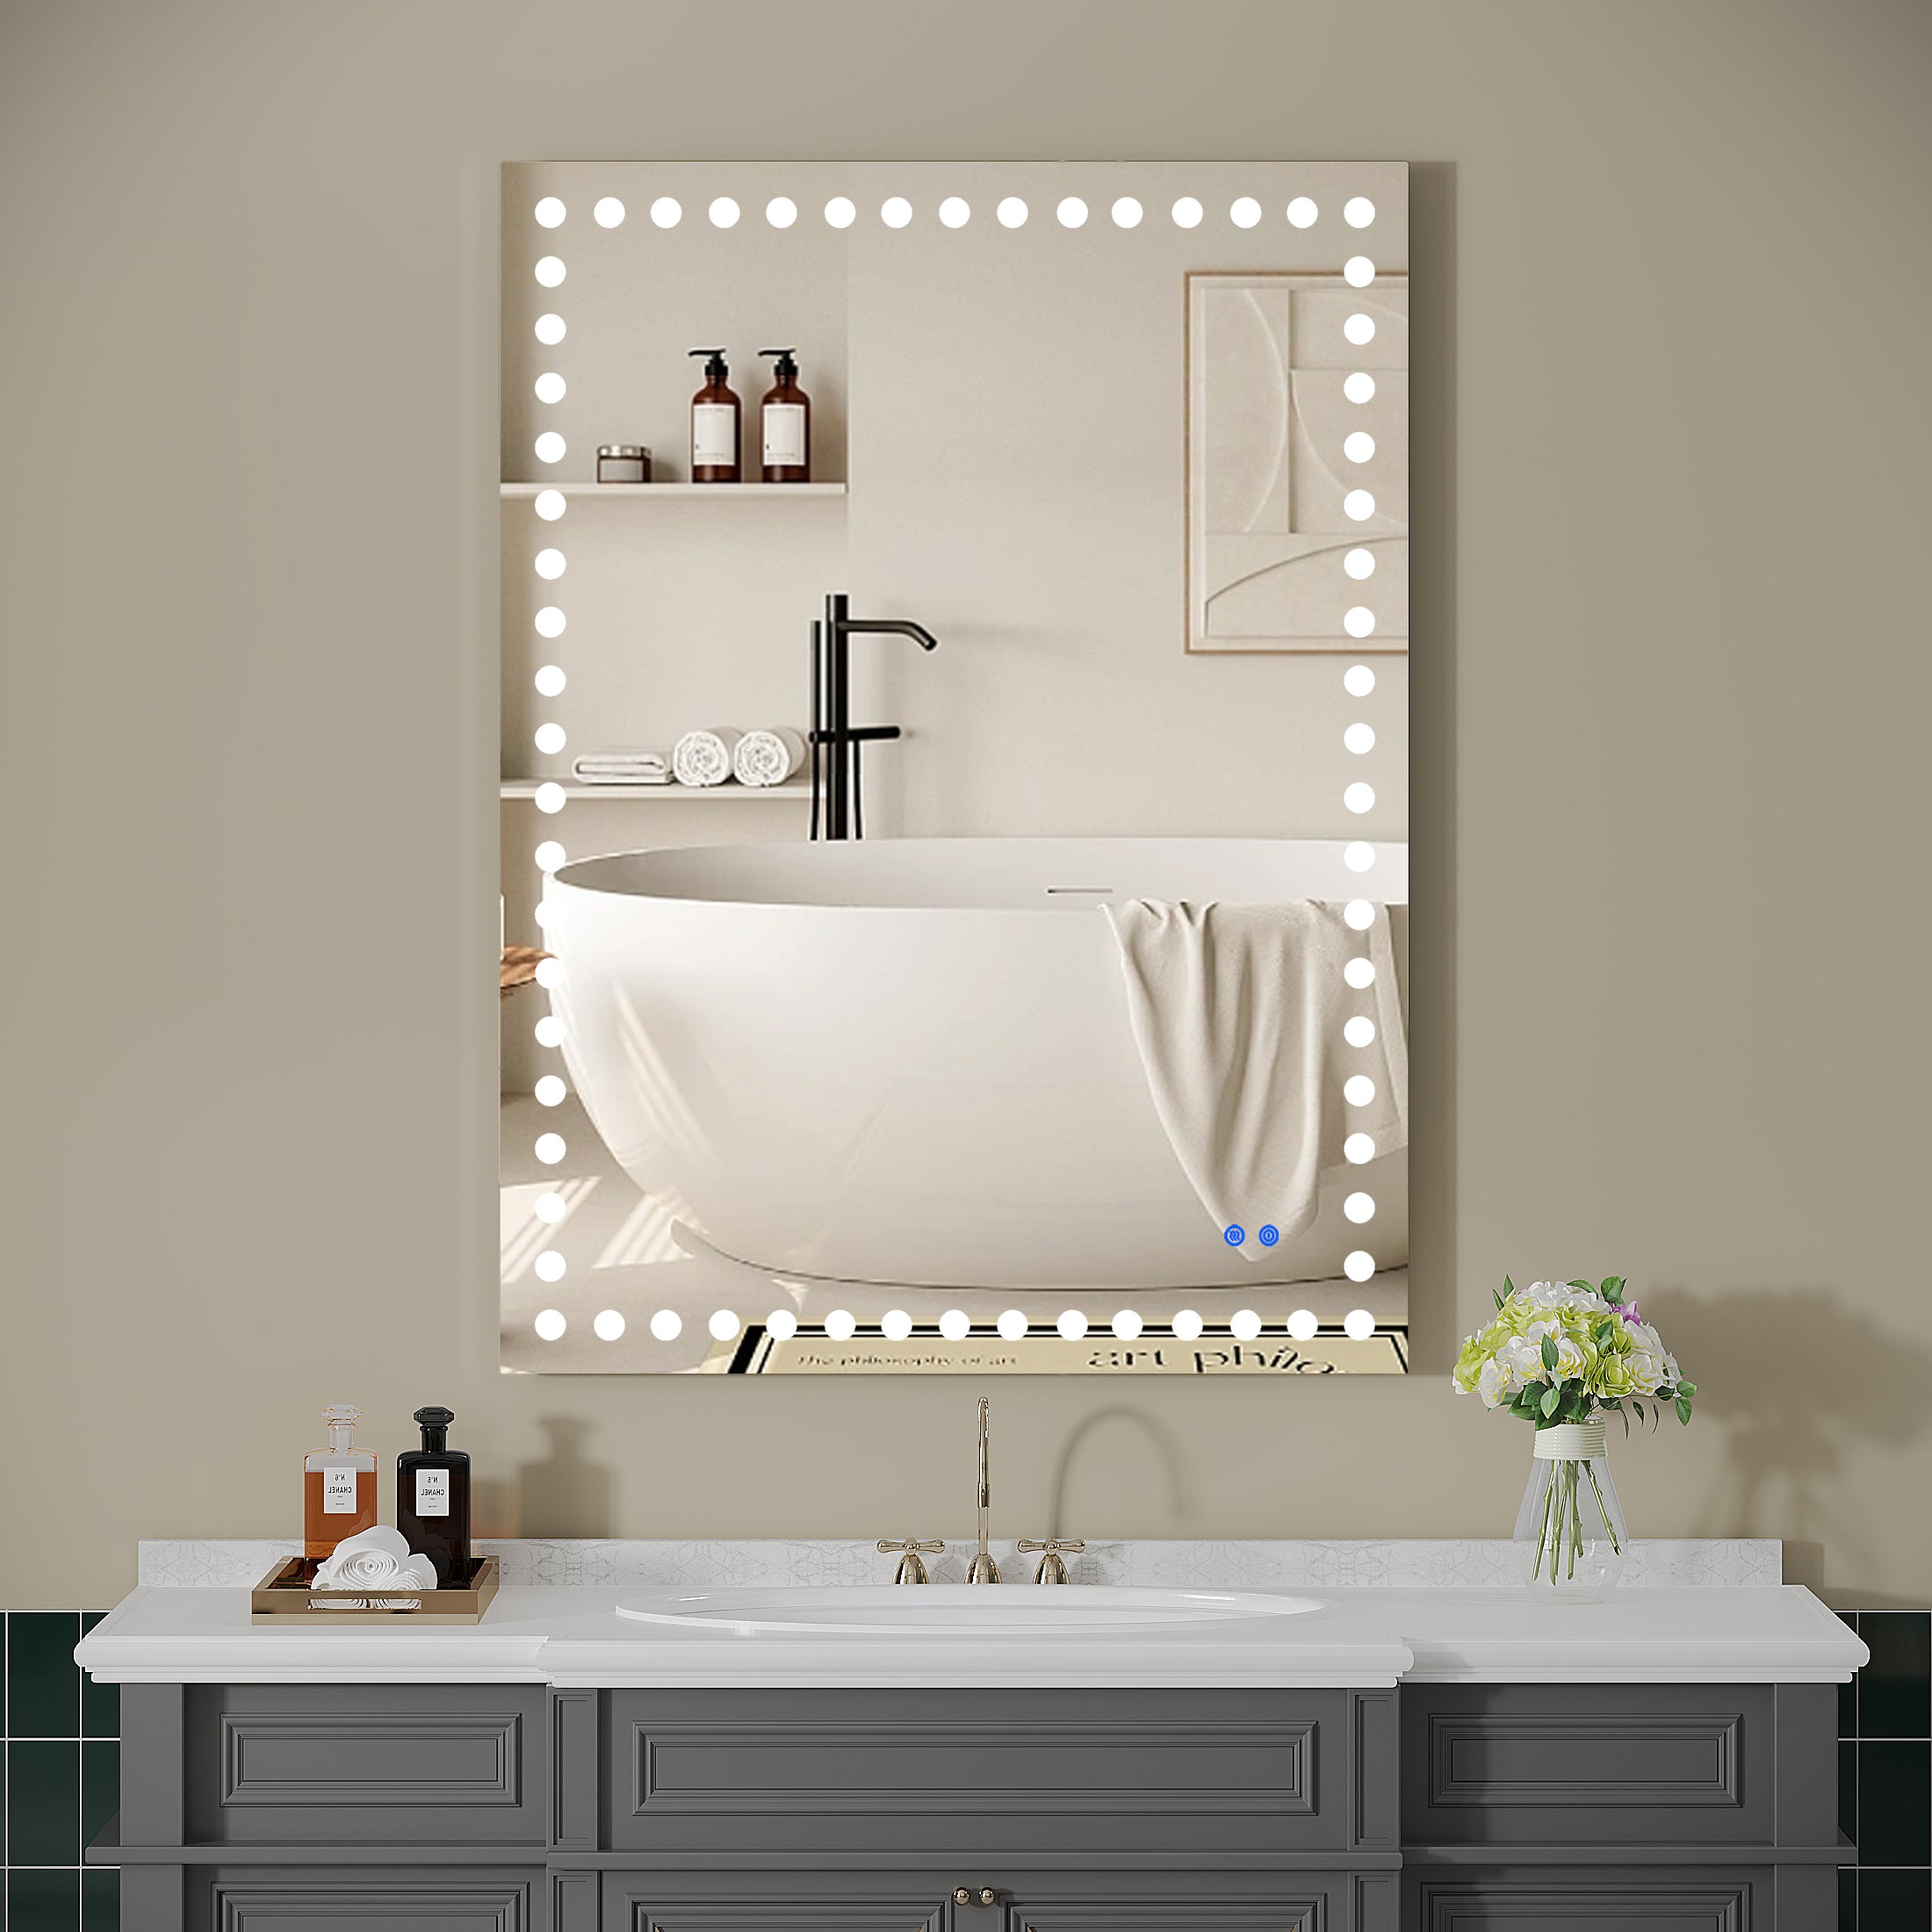 40" X 32" Inch LED Bathroom Wall Mirror with Touch Sensor Switch and Anti-Fog